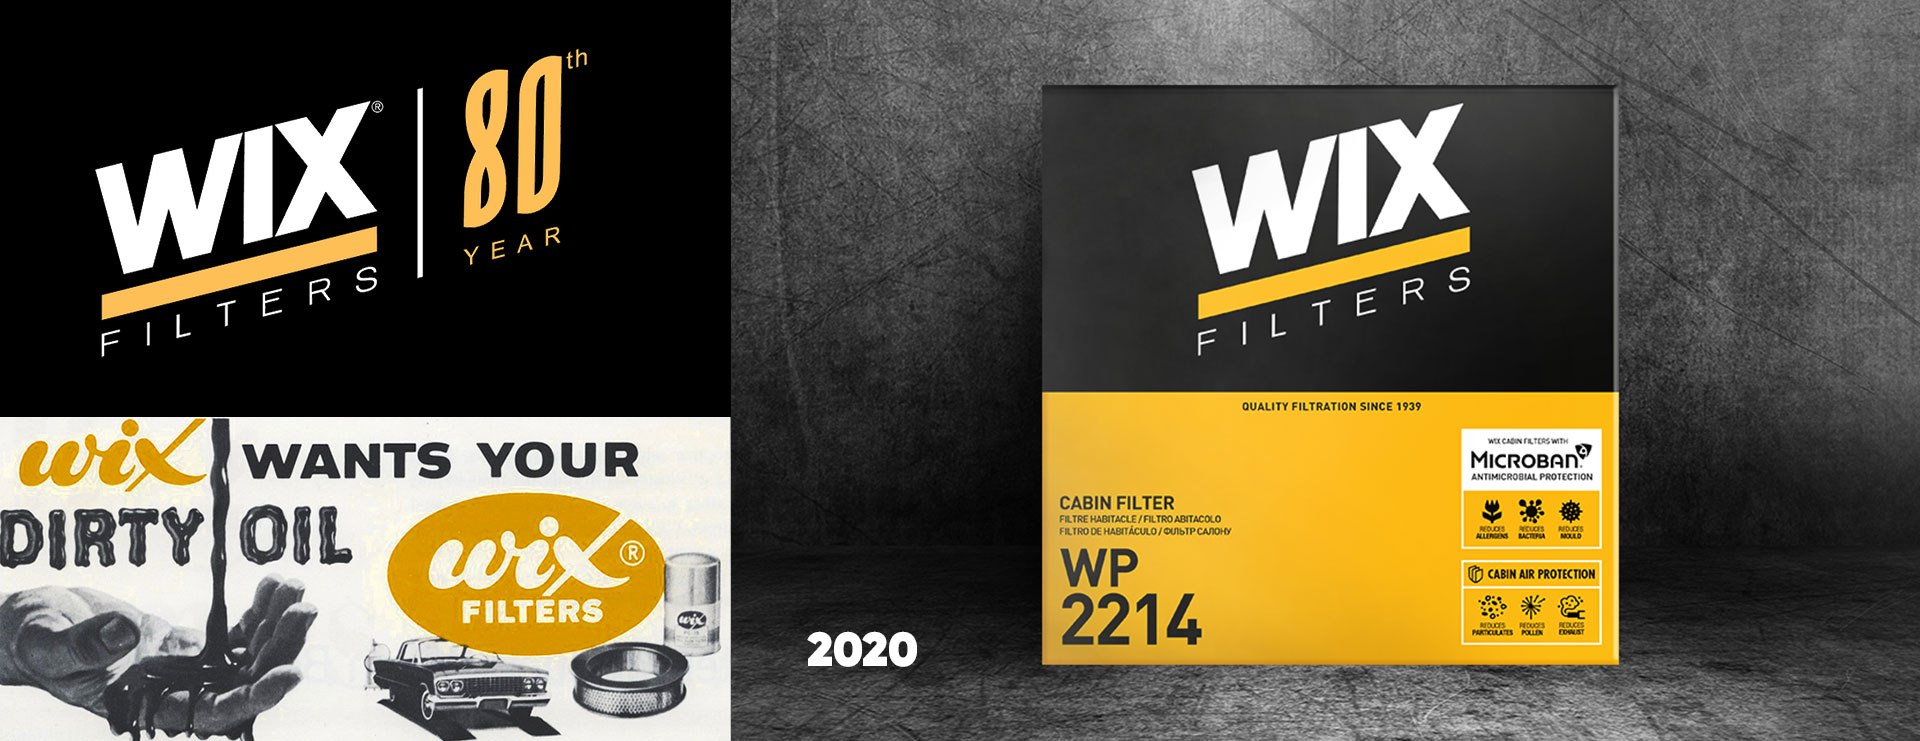 Design of the new packaging of the Wix cabin filter